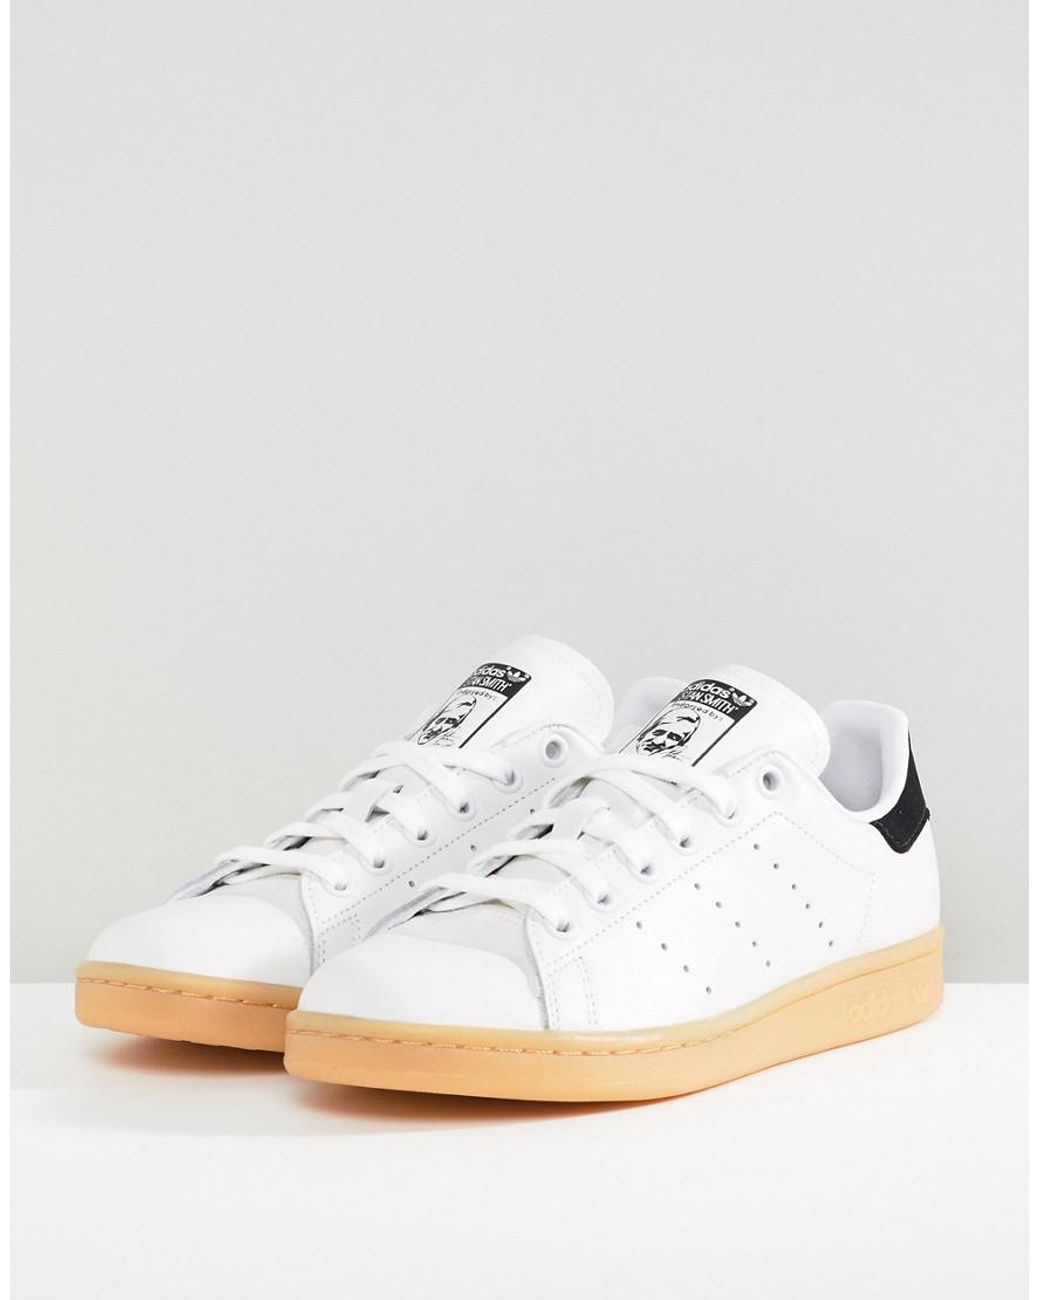 adidas Originals Stan Smith Sneakers In Off White With Gum Sole in